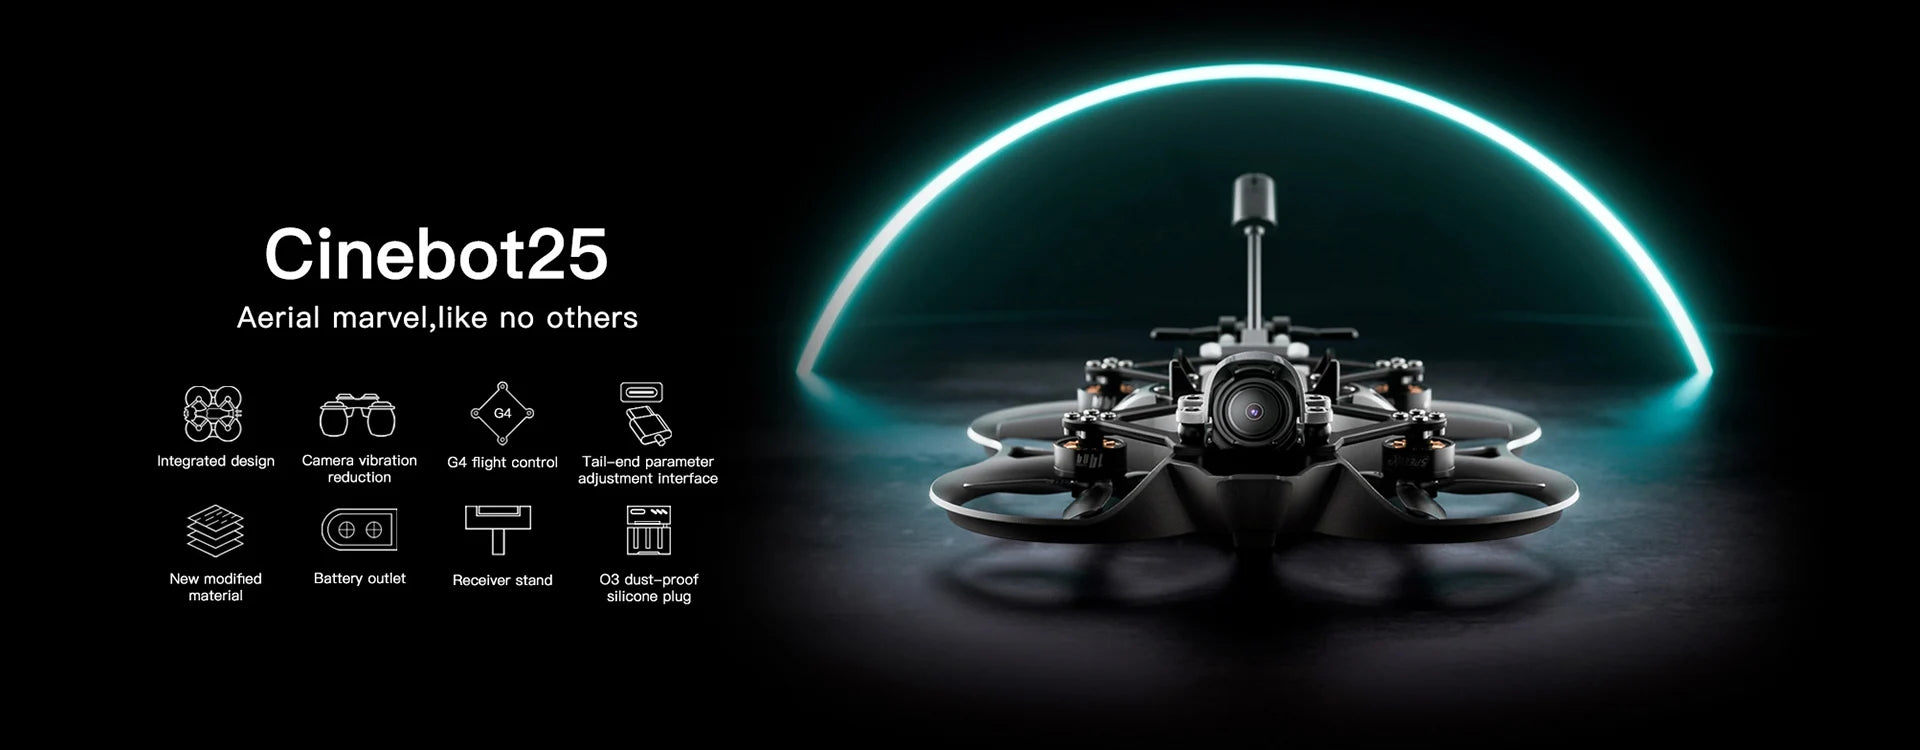 GEPRC Cinebot25 S HD O3  2.5inch FPV, Cinebot25 Aerial marvel,like no others G4 Integrated design Camera vibration G